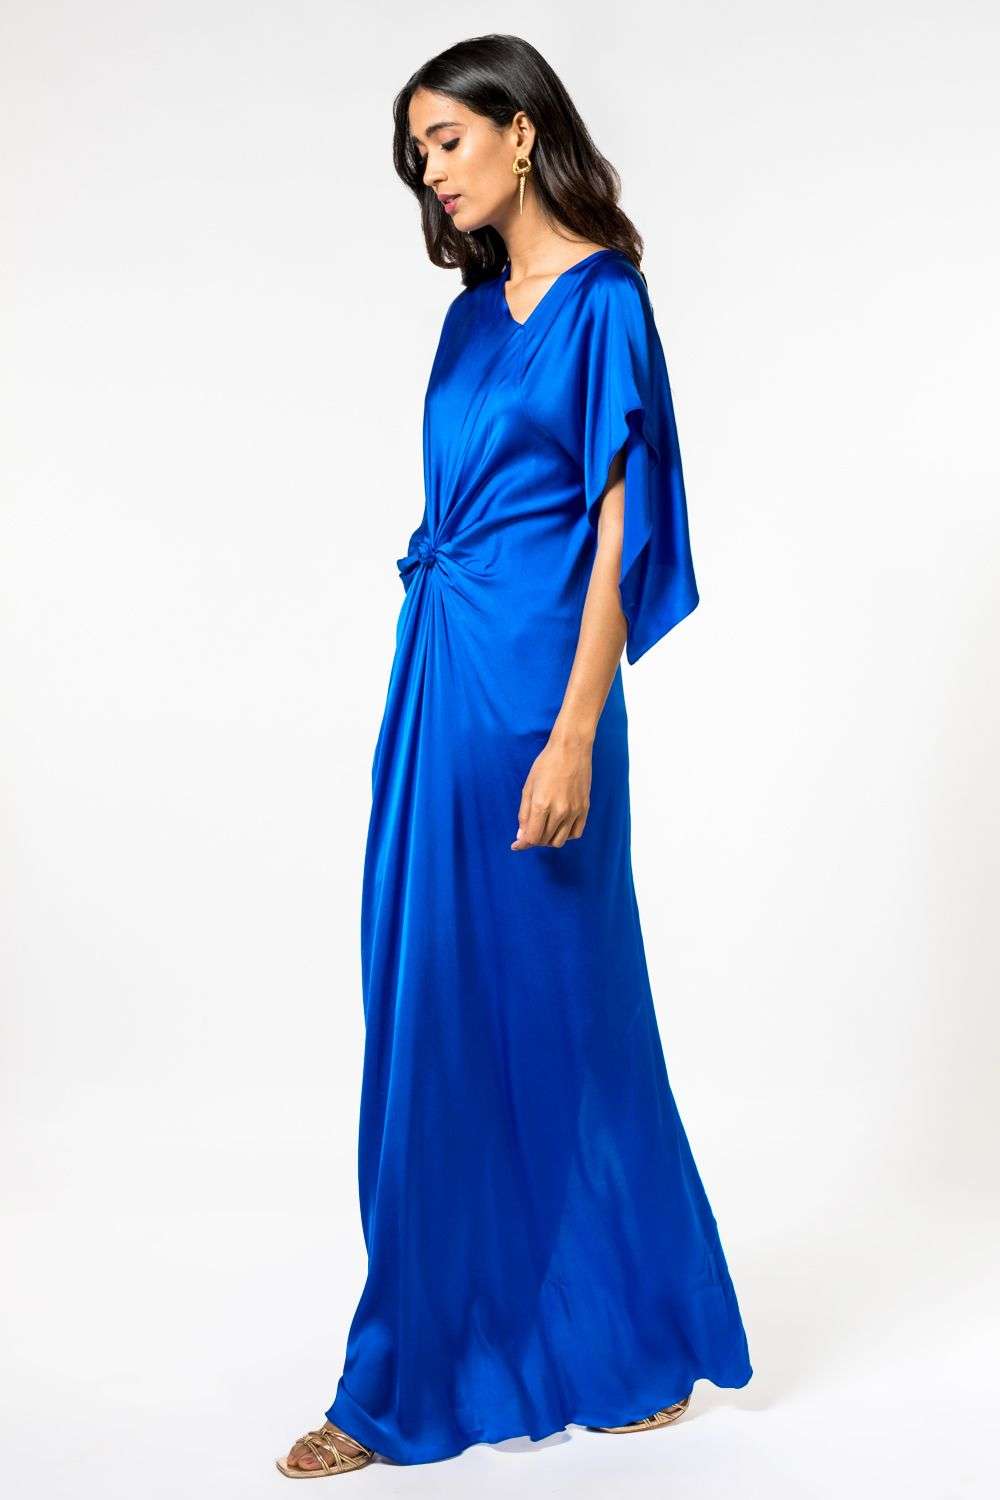 Satin Silk Gown in Blue with Patch work | Designer gowns, Gowns, Dress